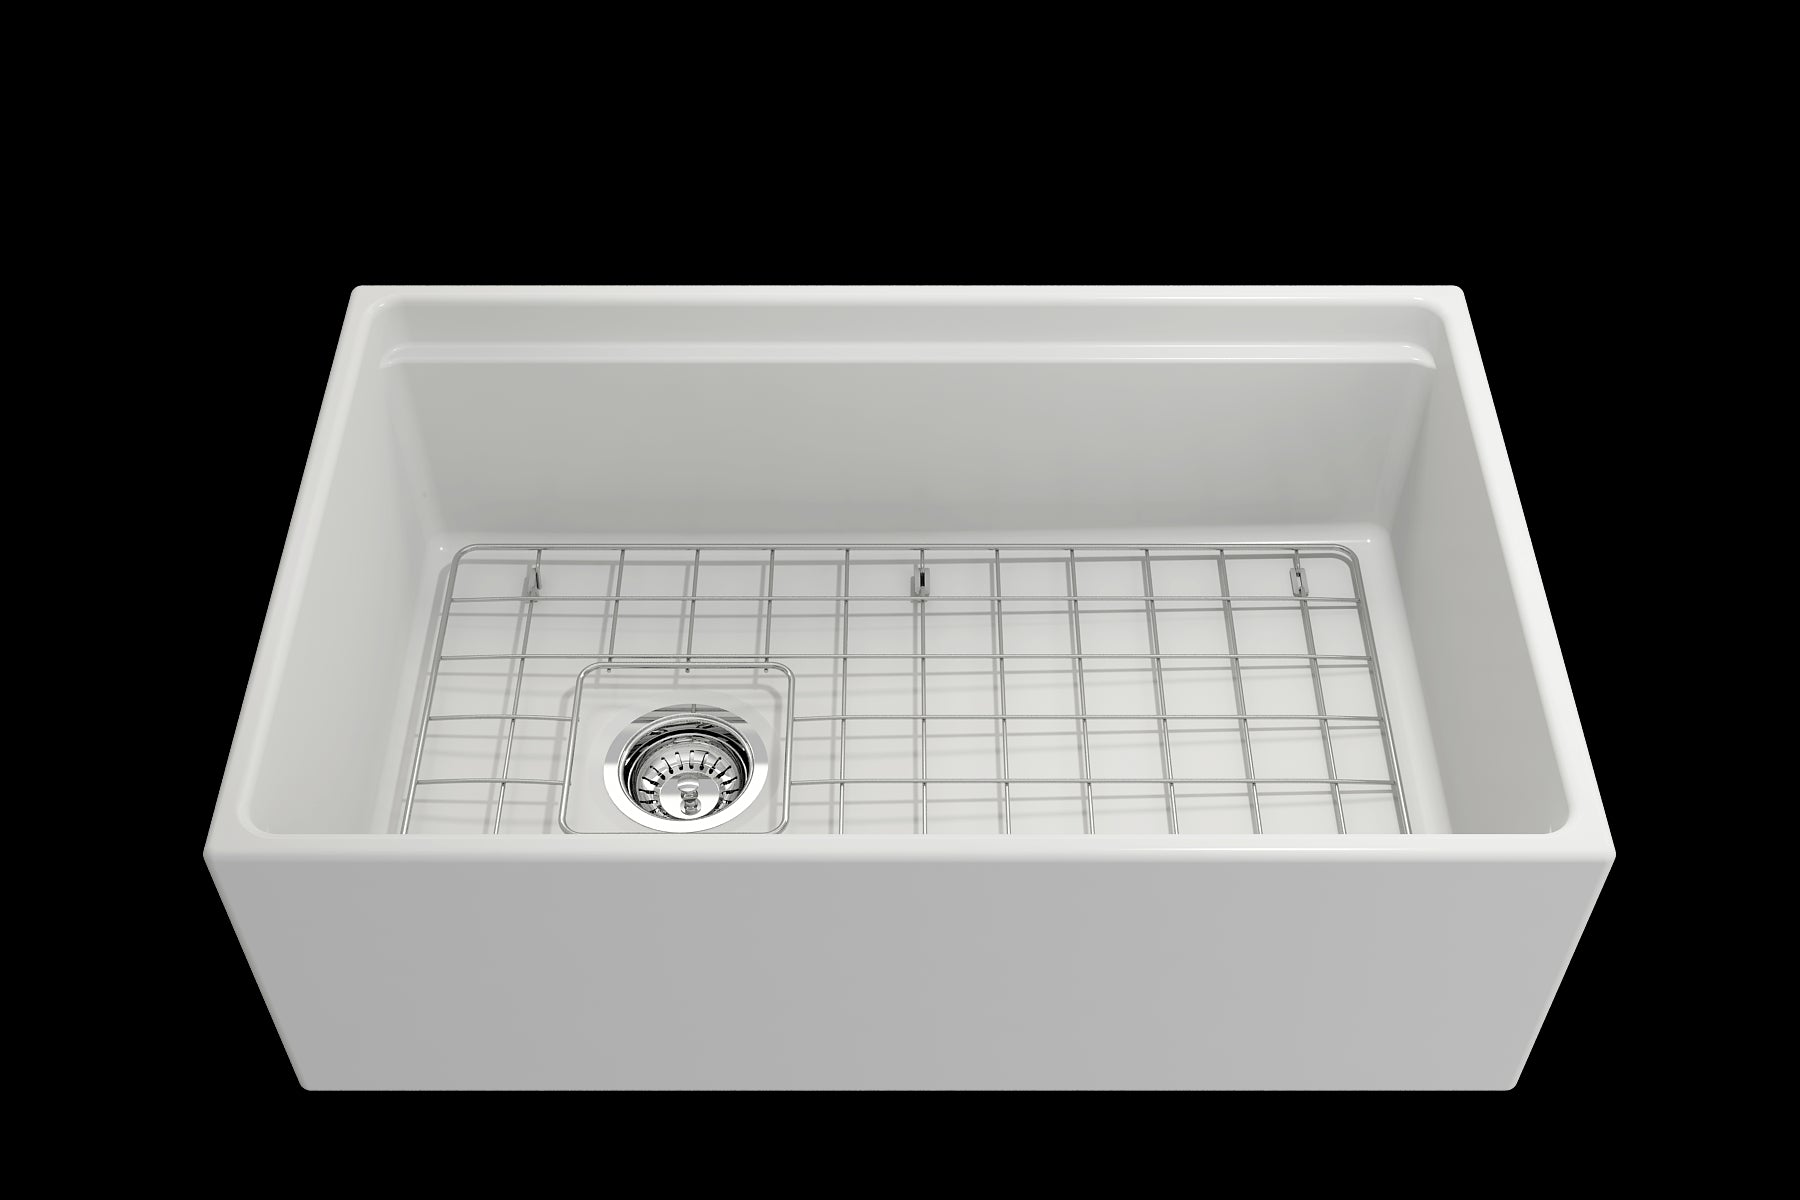 BOCCHI CONTEMPO 30" Fireclay Farmhouse Step Rim With Integrated Work Station Single Bowl Kitchen Sink With Accessories